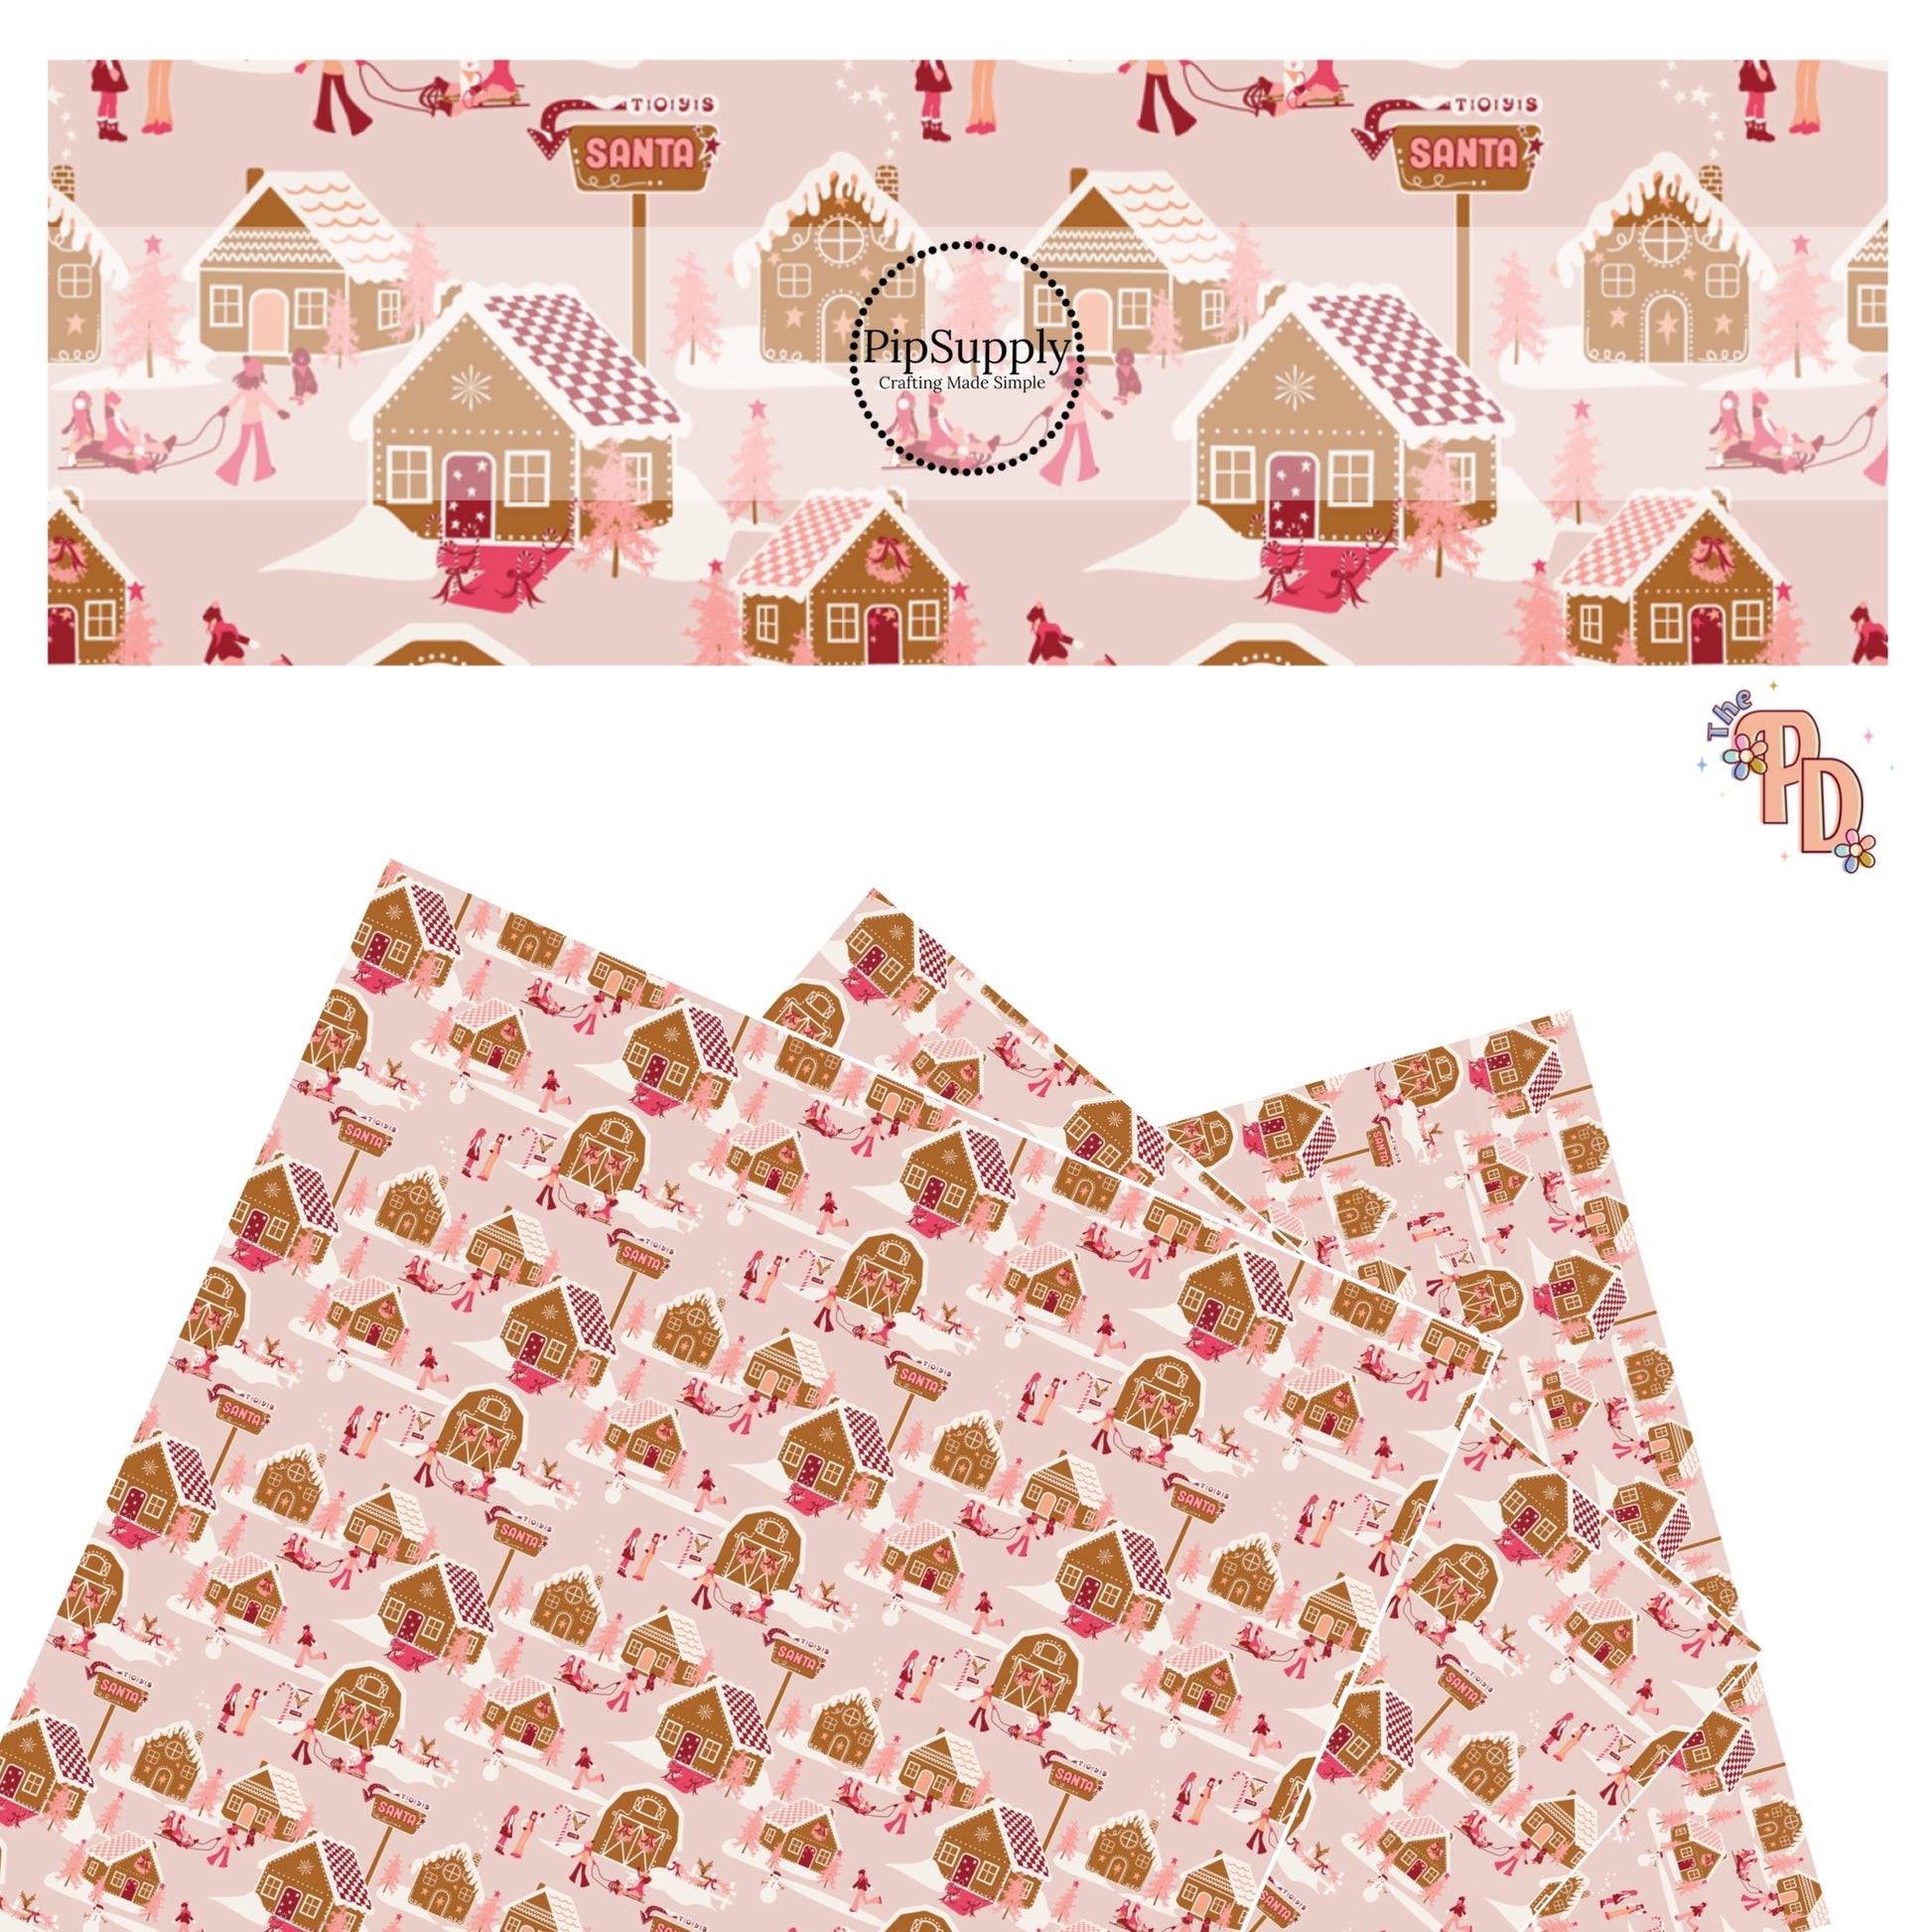 Snowy gingerbread houses with people and trees on pink faux leather sheets